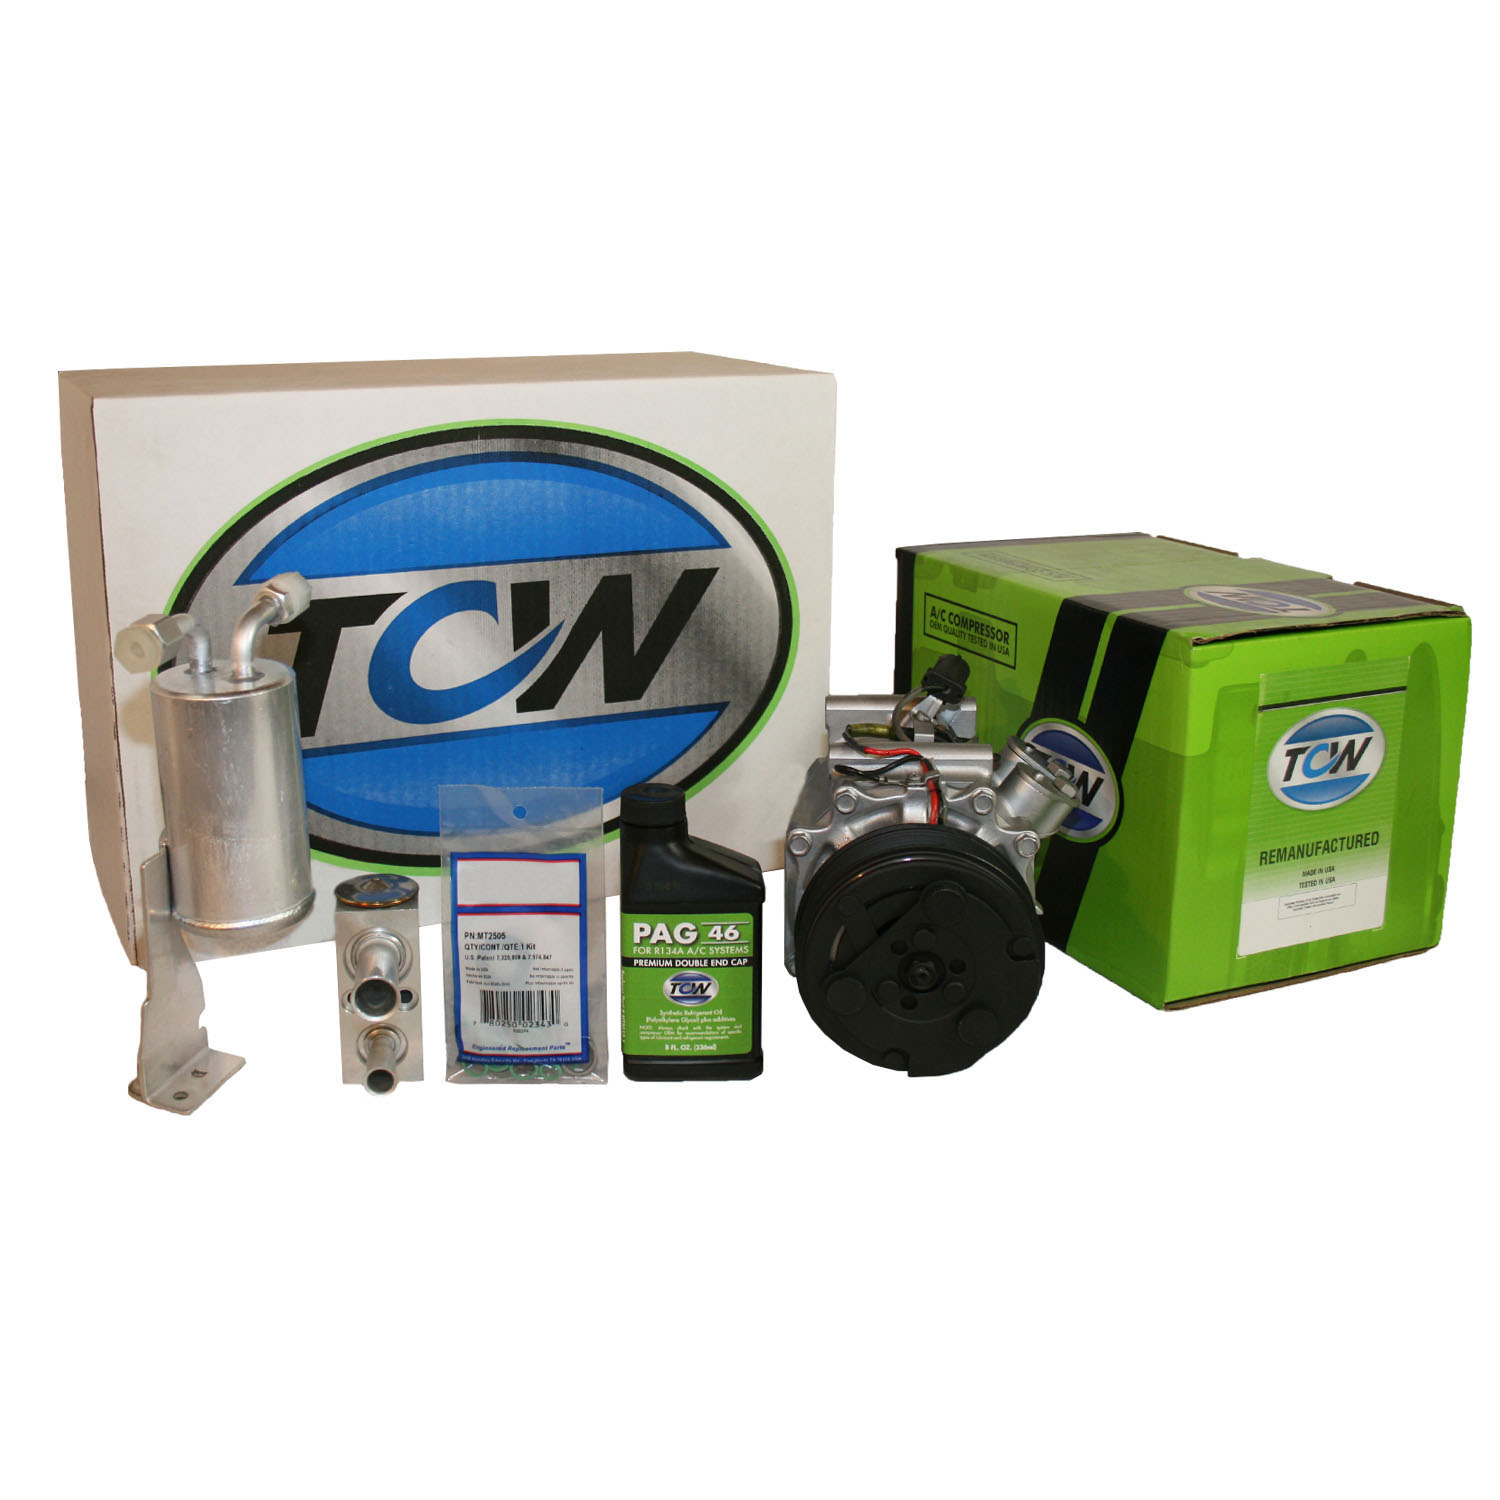 TCW Vehicle A/C Kit K1000465R Remanufactured Product Image field_60b6a13a6e67c